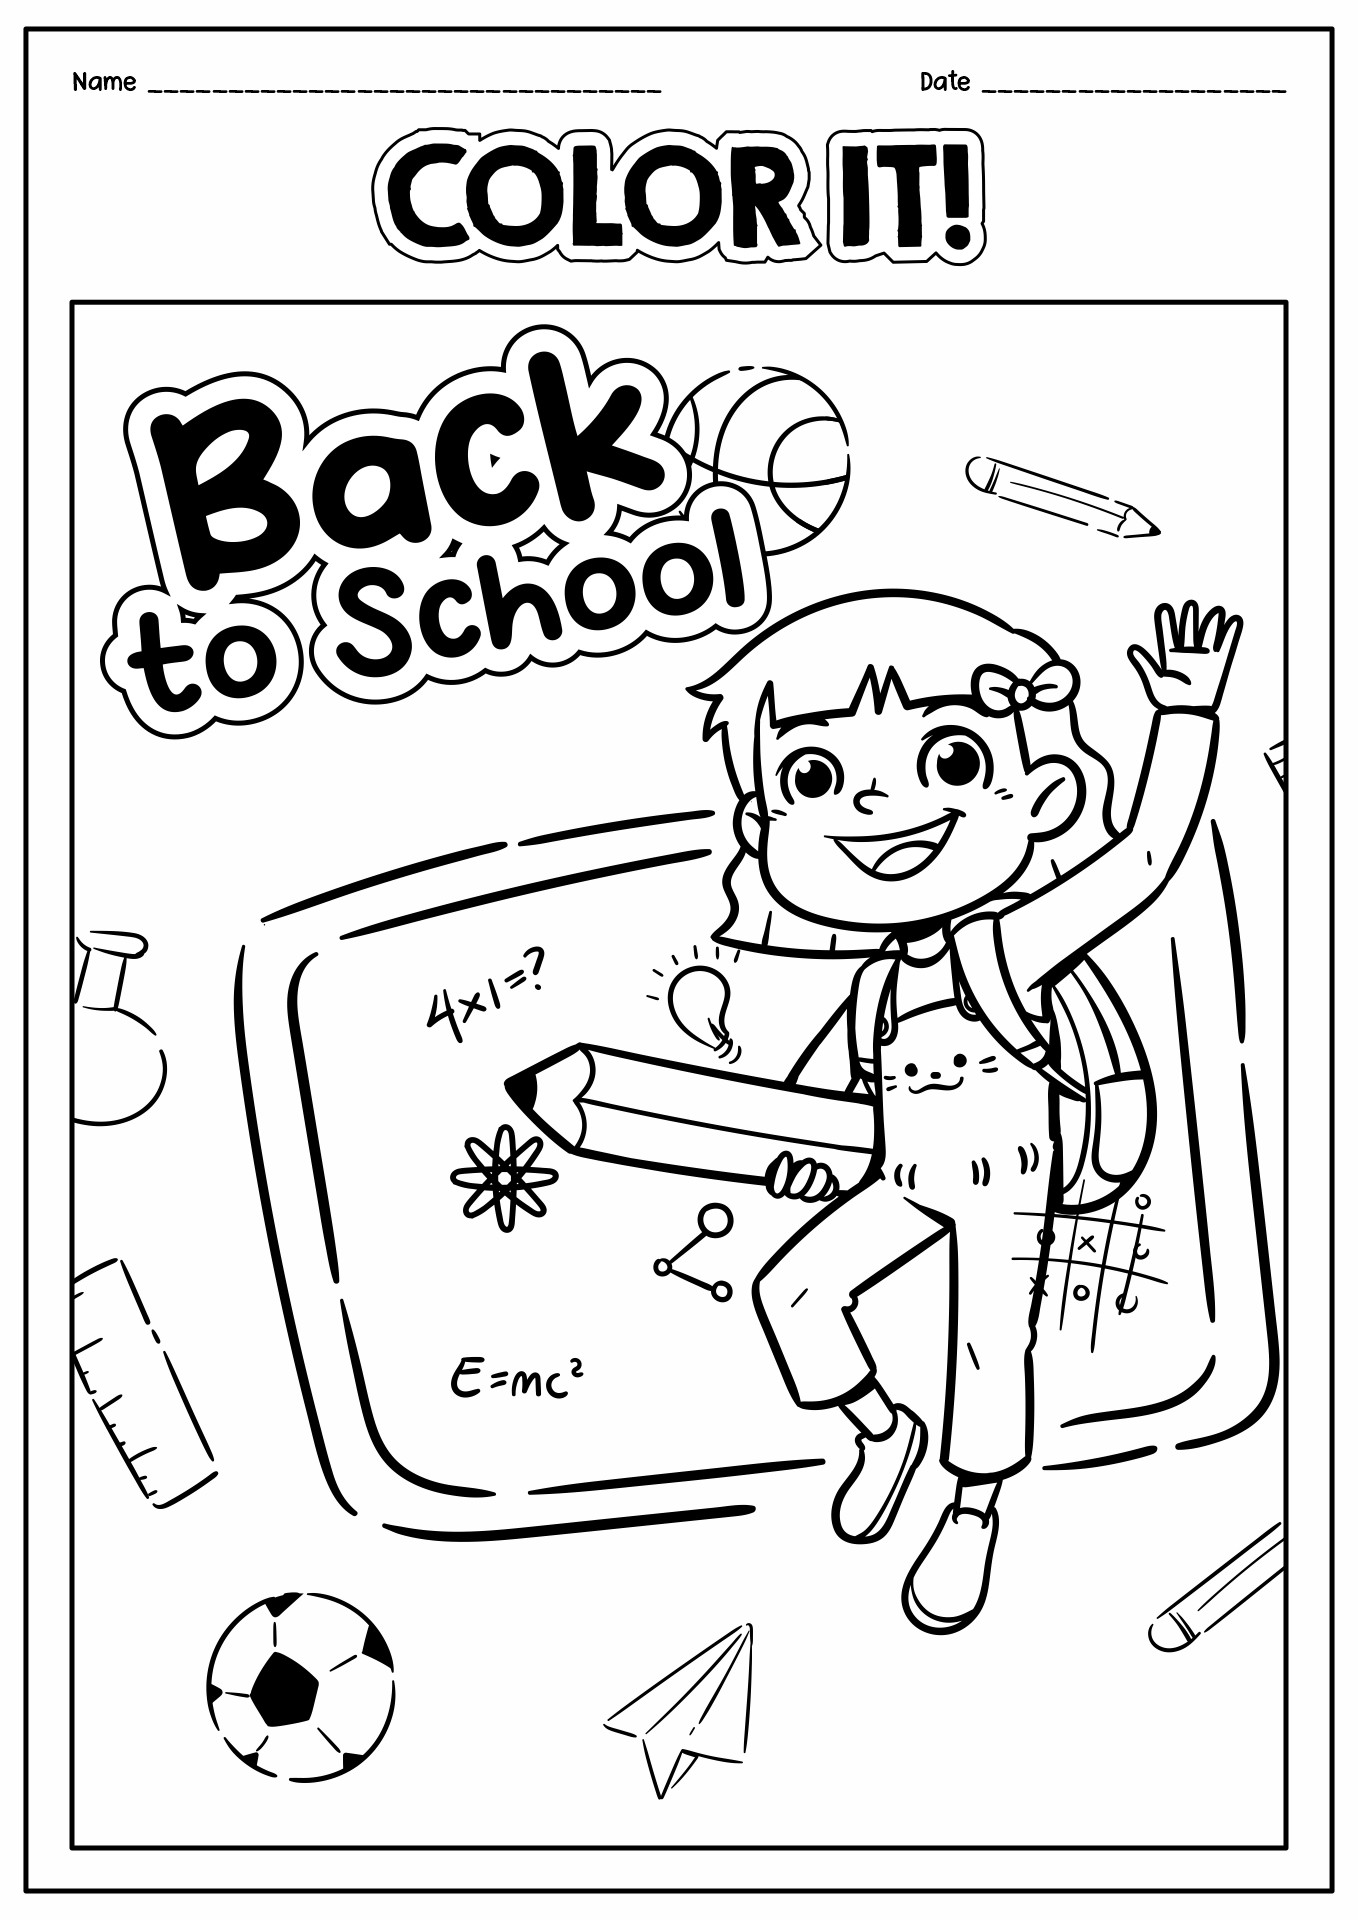 Back to School Coloring Pages for Kids Printable Image